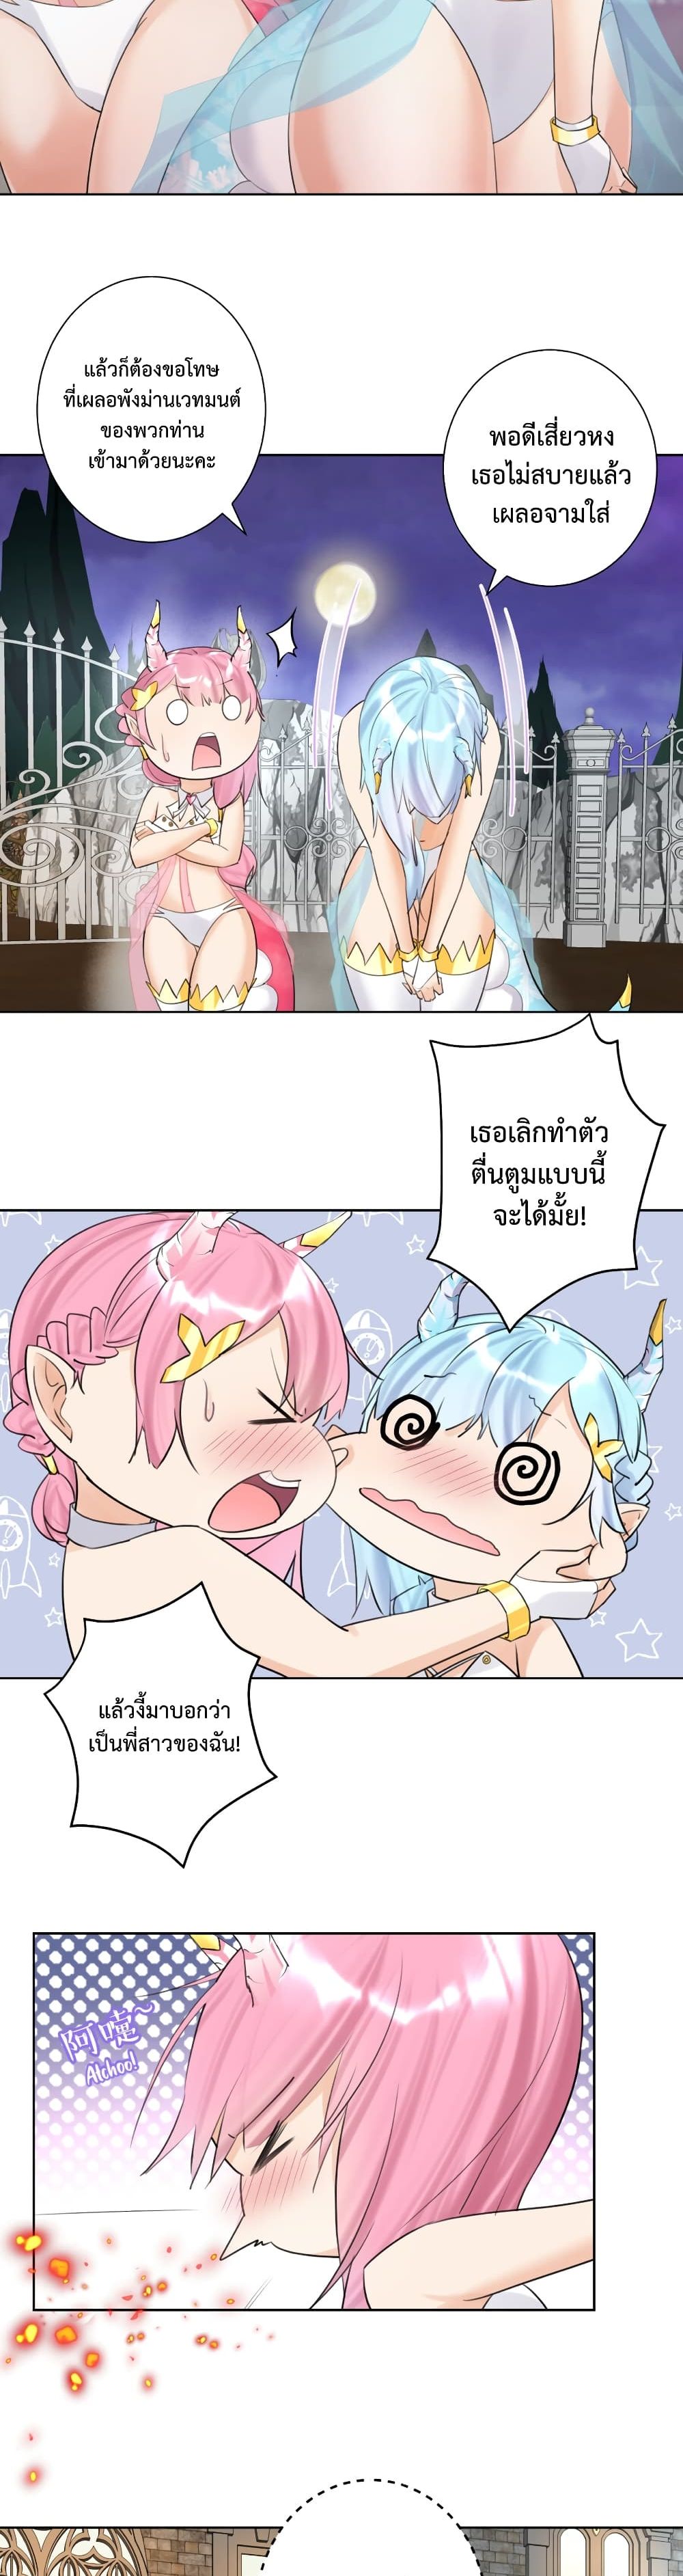 The Hierarch Can’t Resist His Mistresses ท่านอาจารย์กำมะลอ 8-8